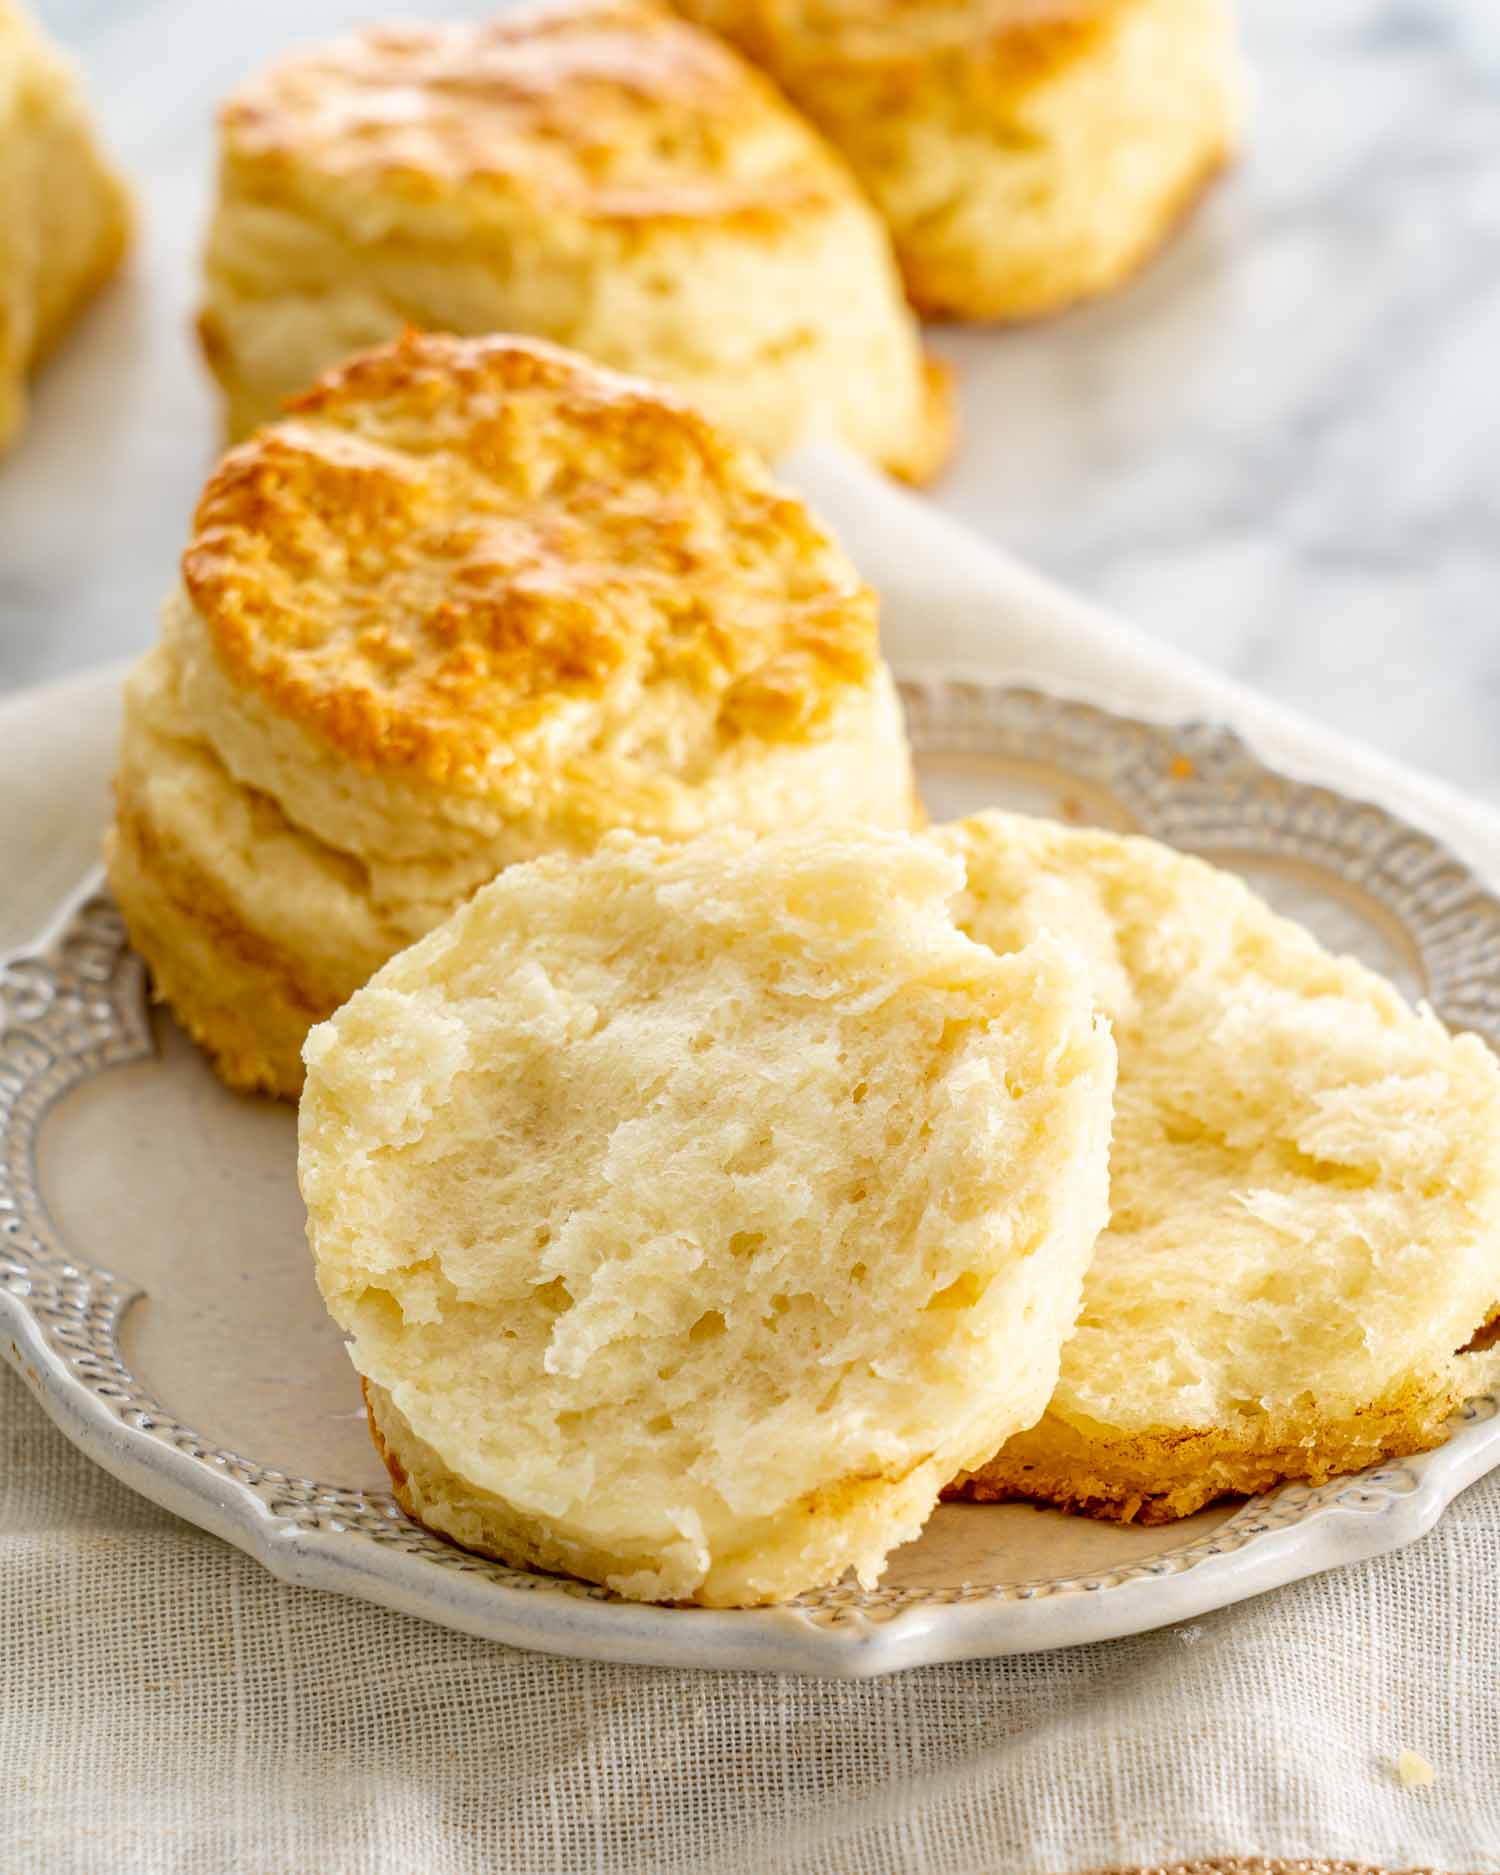 a couple buttermilk biscuits on a plate.